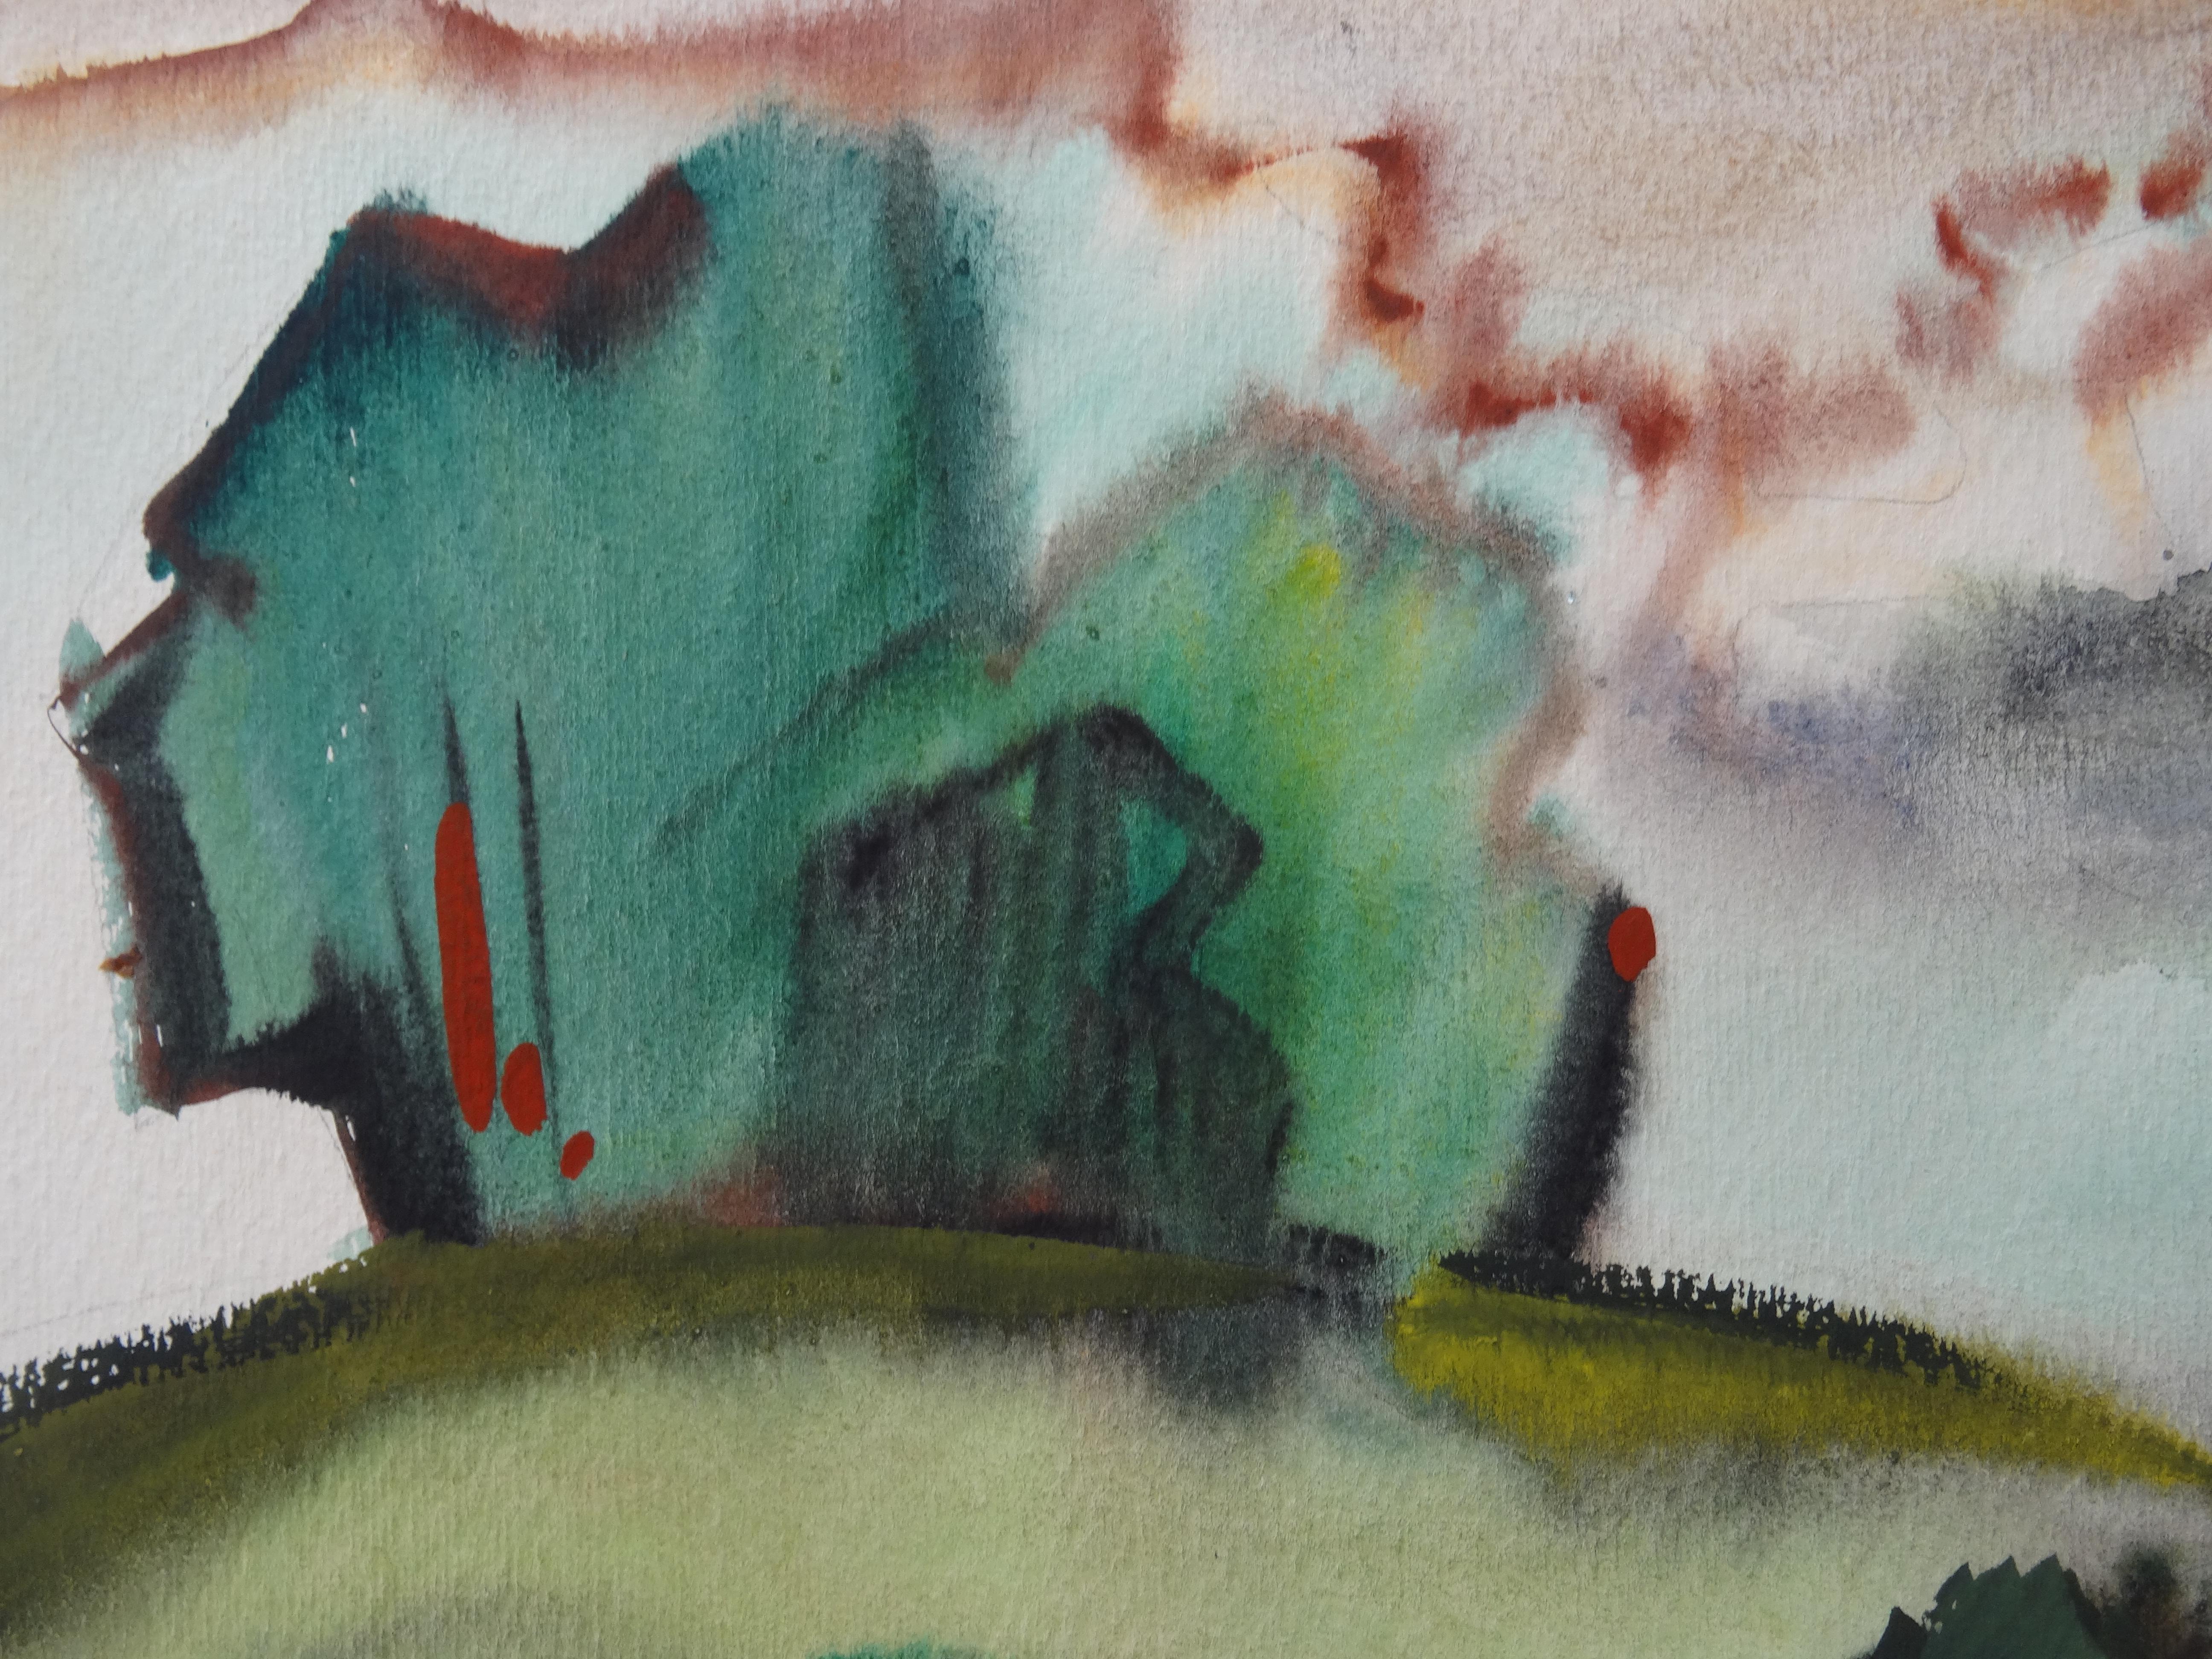 Countryside. 1990. Paper, watercolor, 28x30 cm - Expressionist Painting by Dzidra Bauma